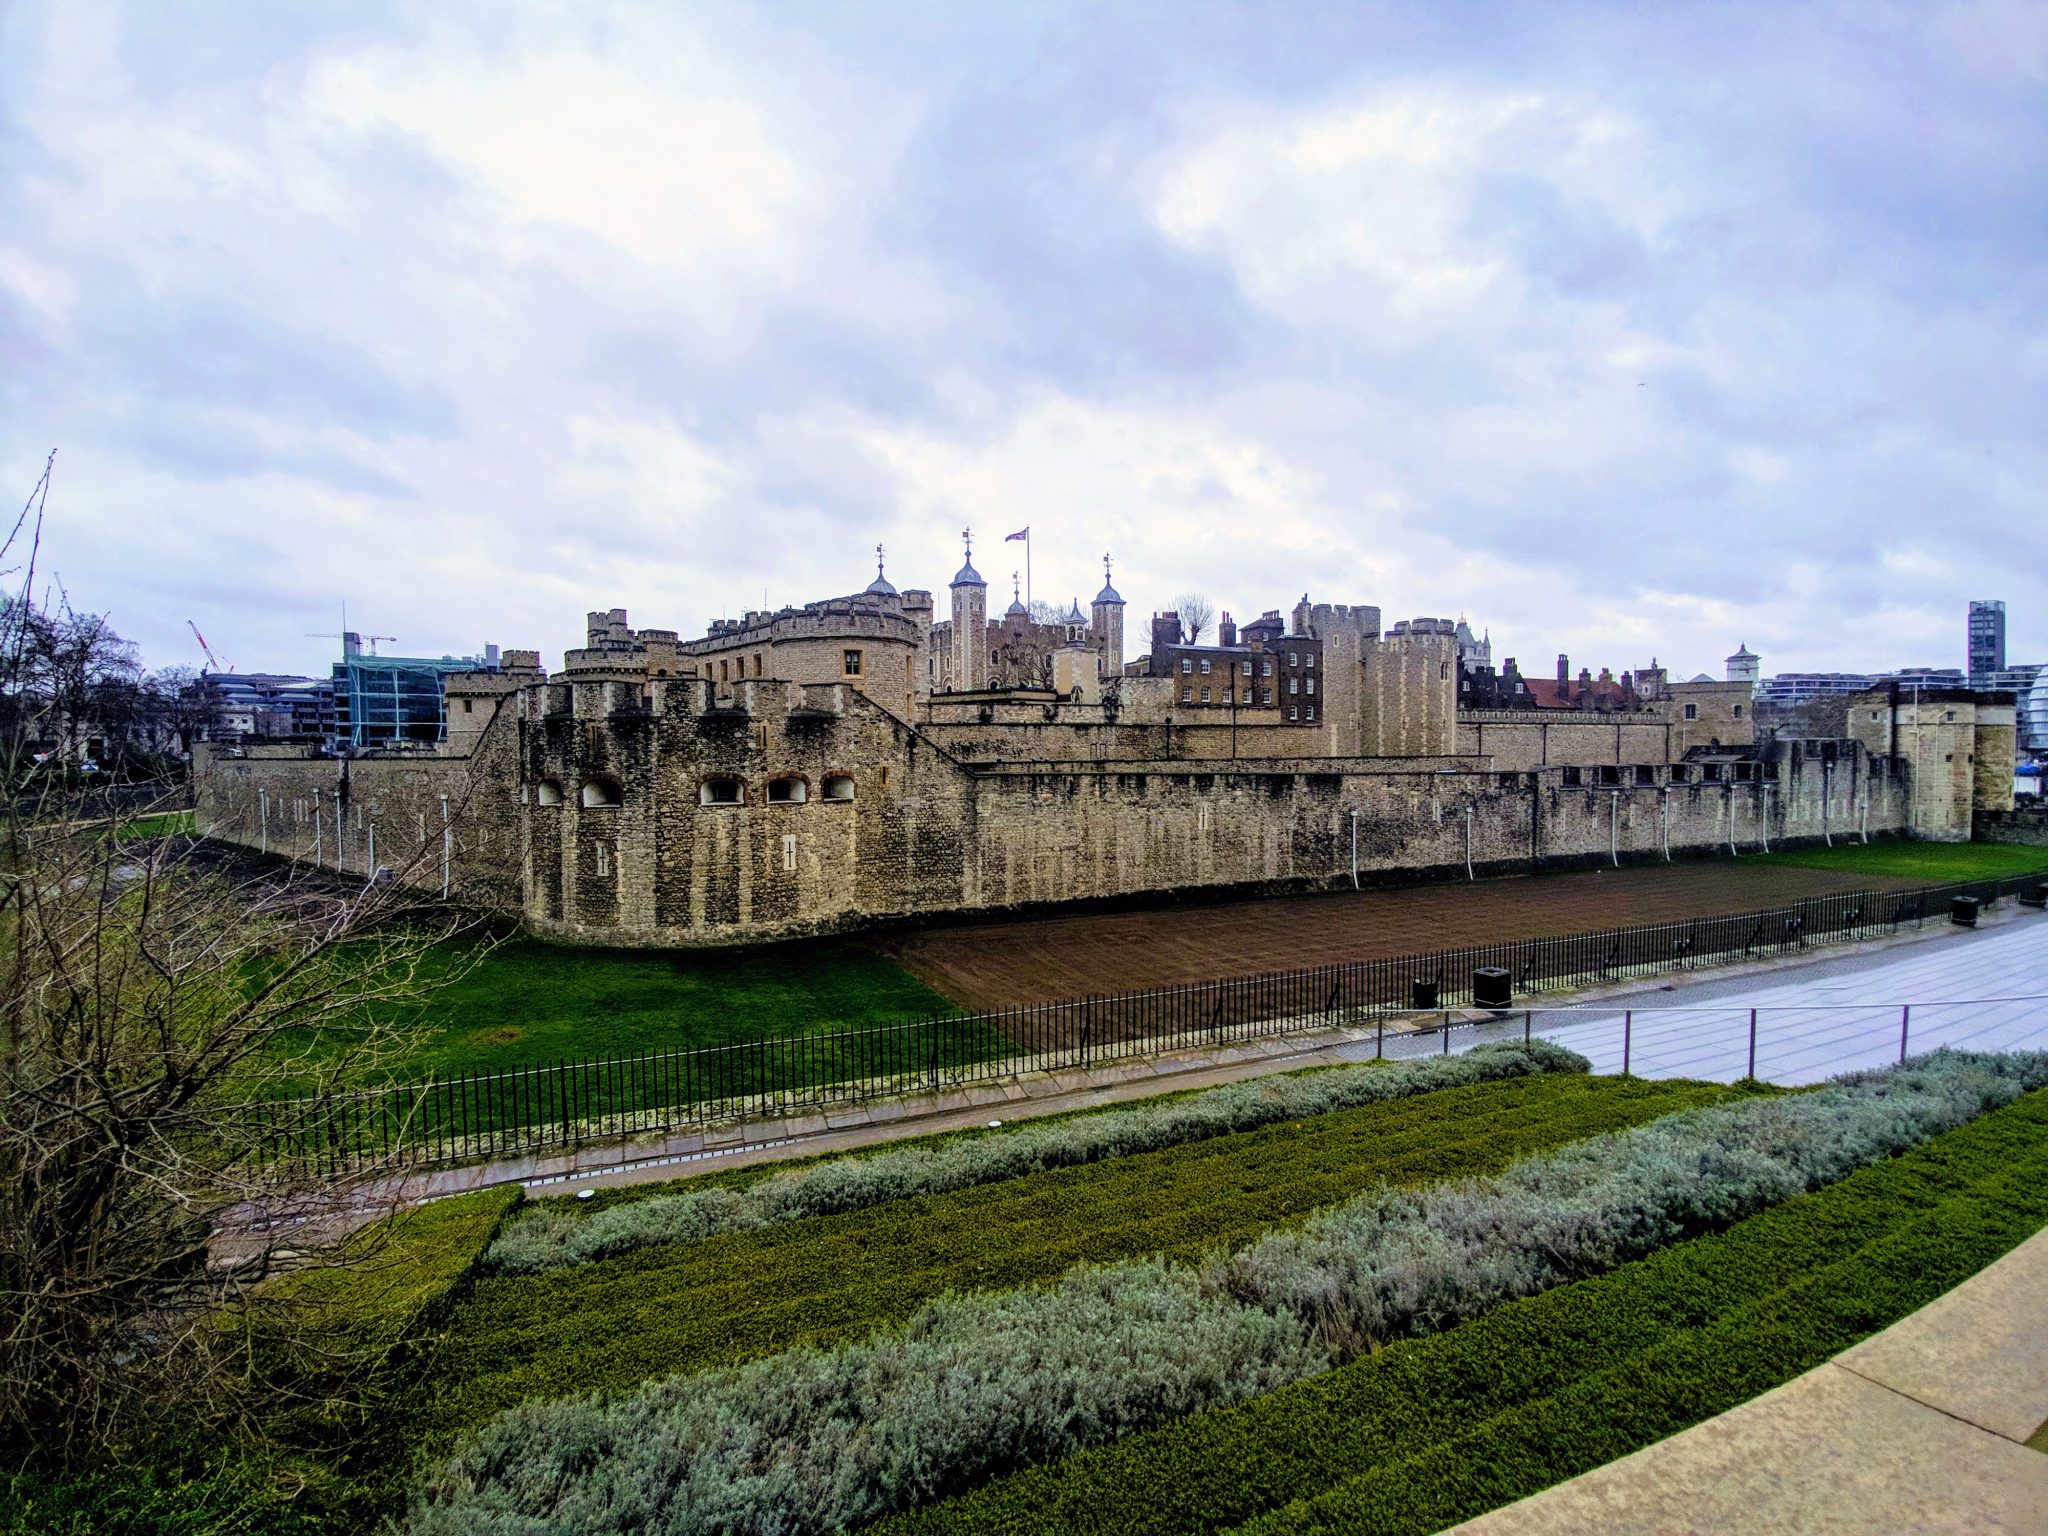 Tower of London and walls on a cloudy day in London, UK